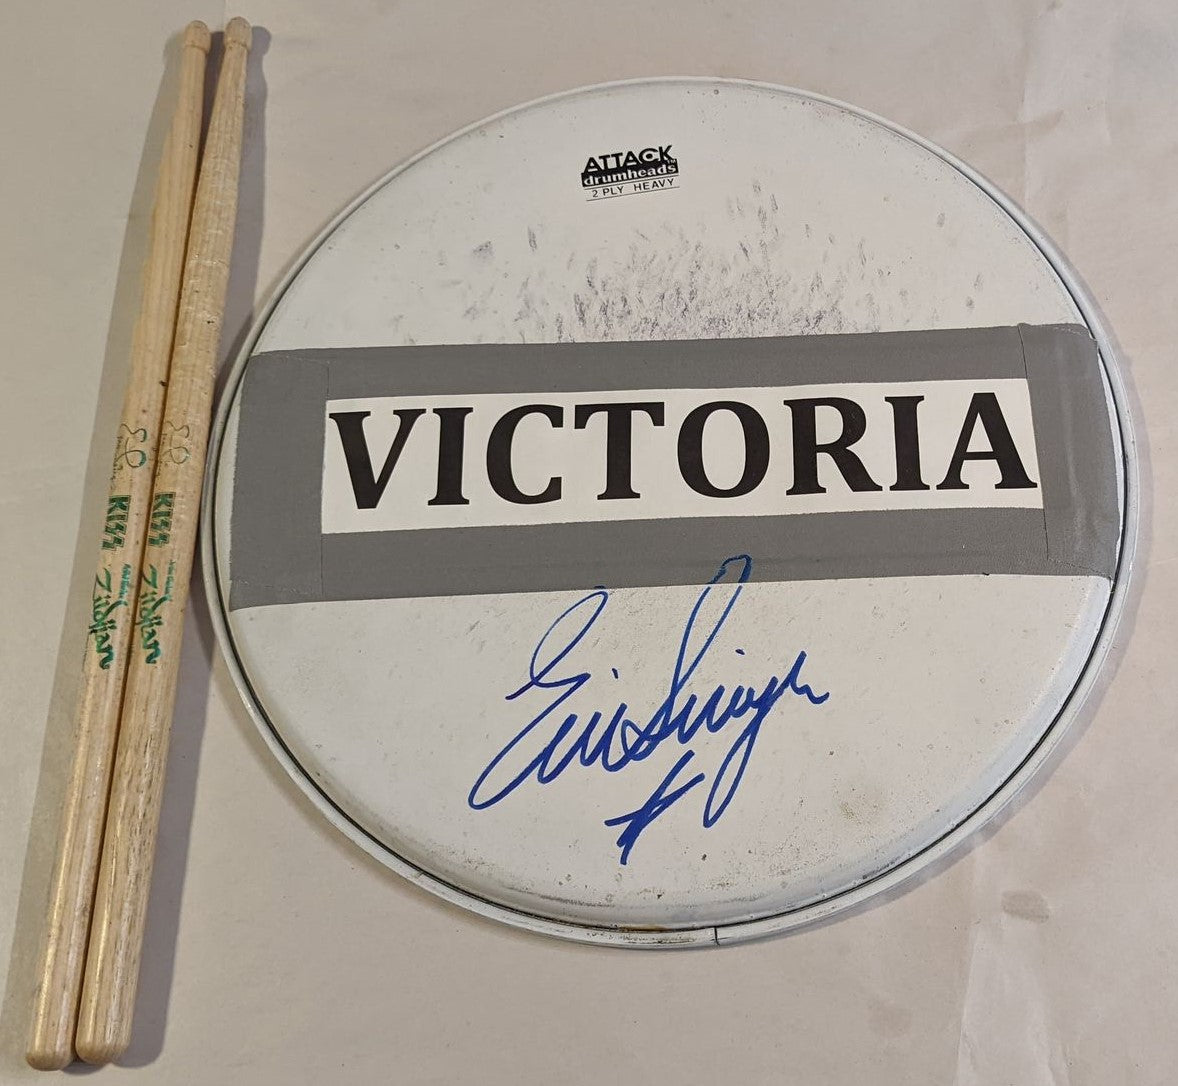 VICTORIA CANADA  07-05-2013 ERIC SINGER Stage-Used Snare Drumhead and Drumsticks